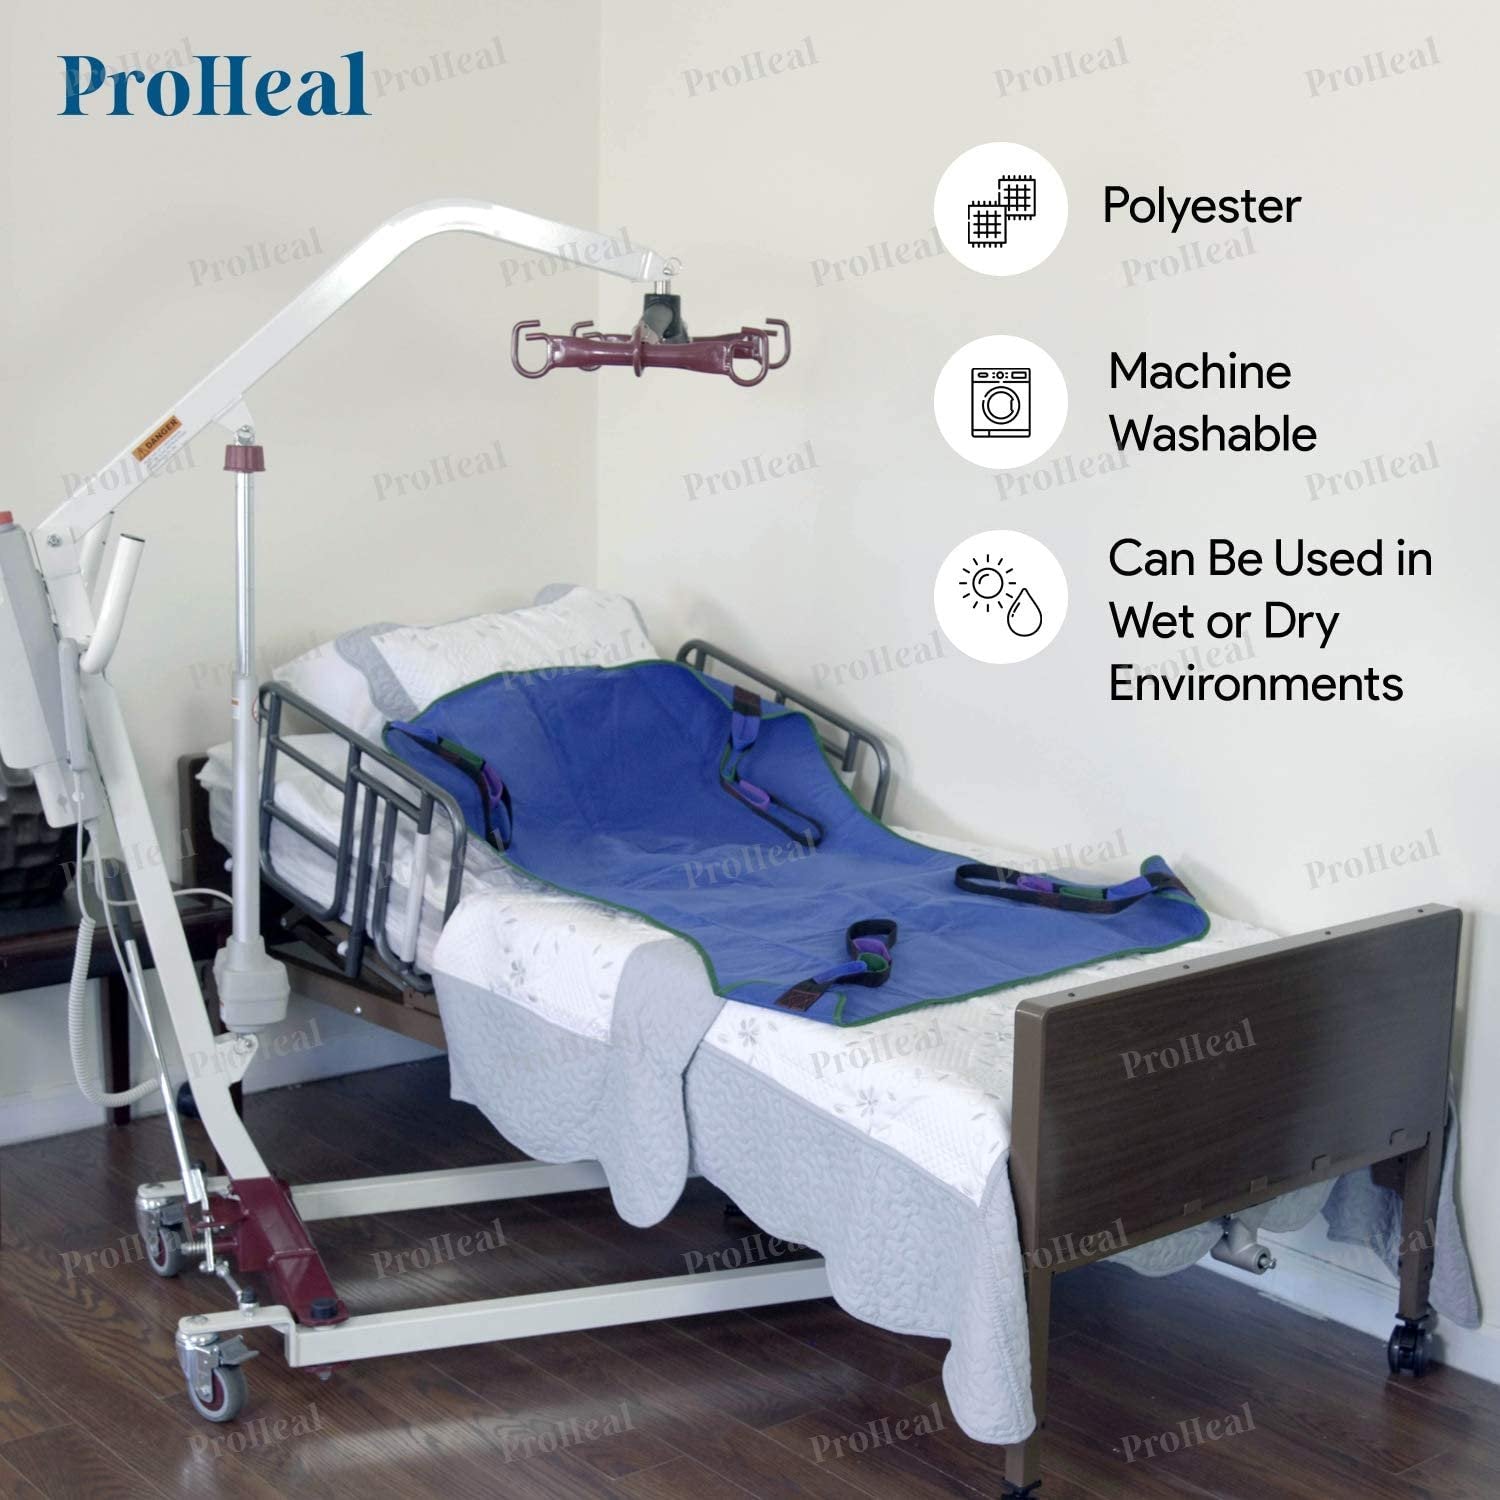 ProHeal Universal Full Body Lift Sling, X Large, 56"L x 43" - Solid Fabric Polyester Slings for Patient Lifts - Compatible with Hoyer, Invacare, McKesson, Drive, Lumex, Medline, Joerns and More